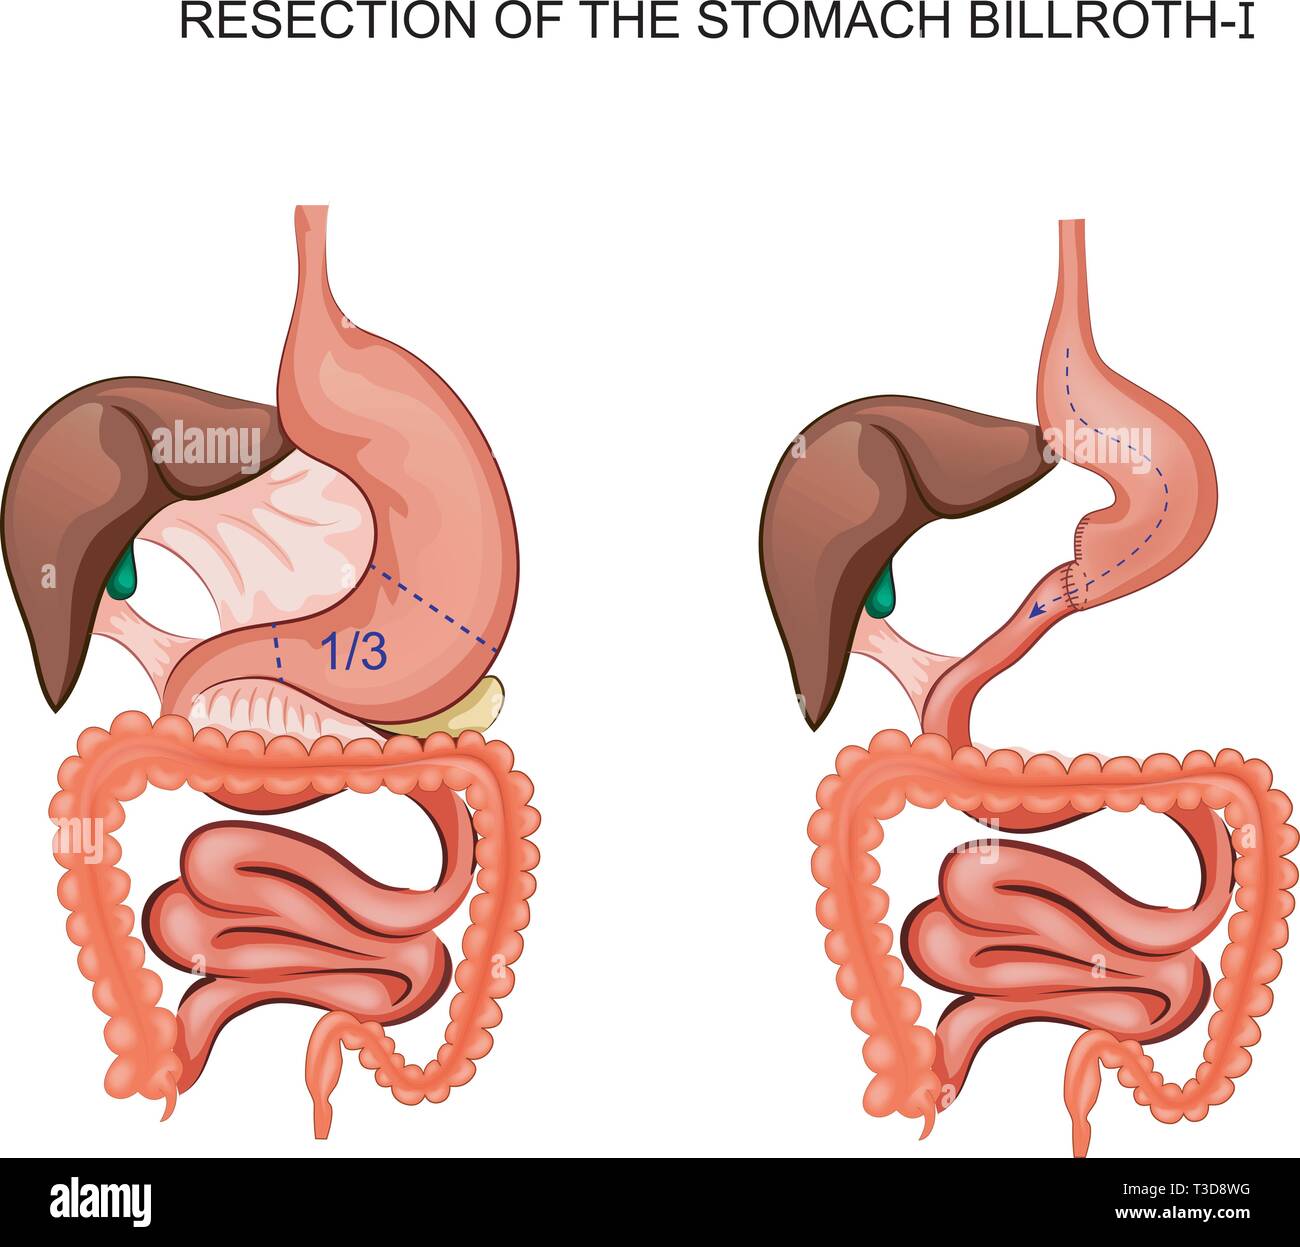 vector illustration of scheme of resection of the stomach Billroth 1 Stock Vector